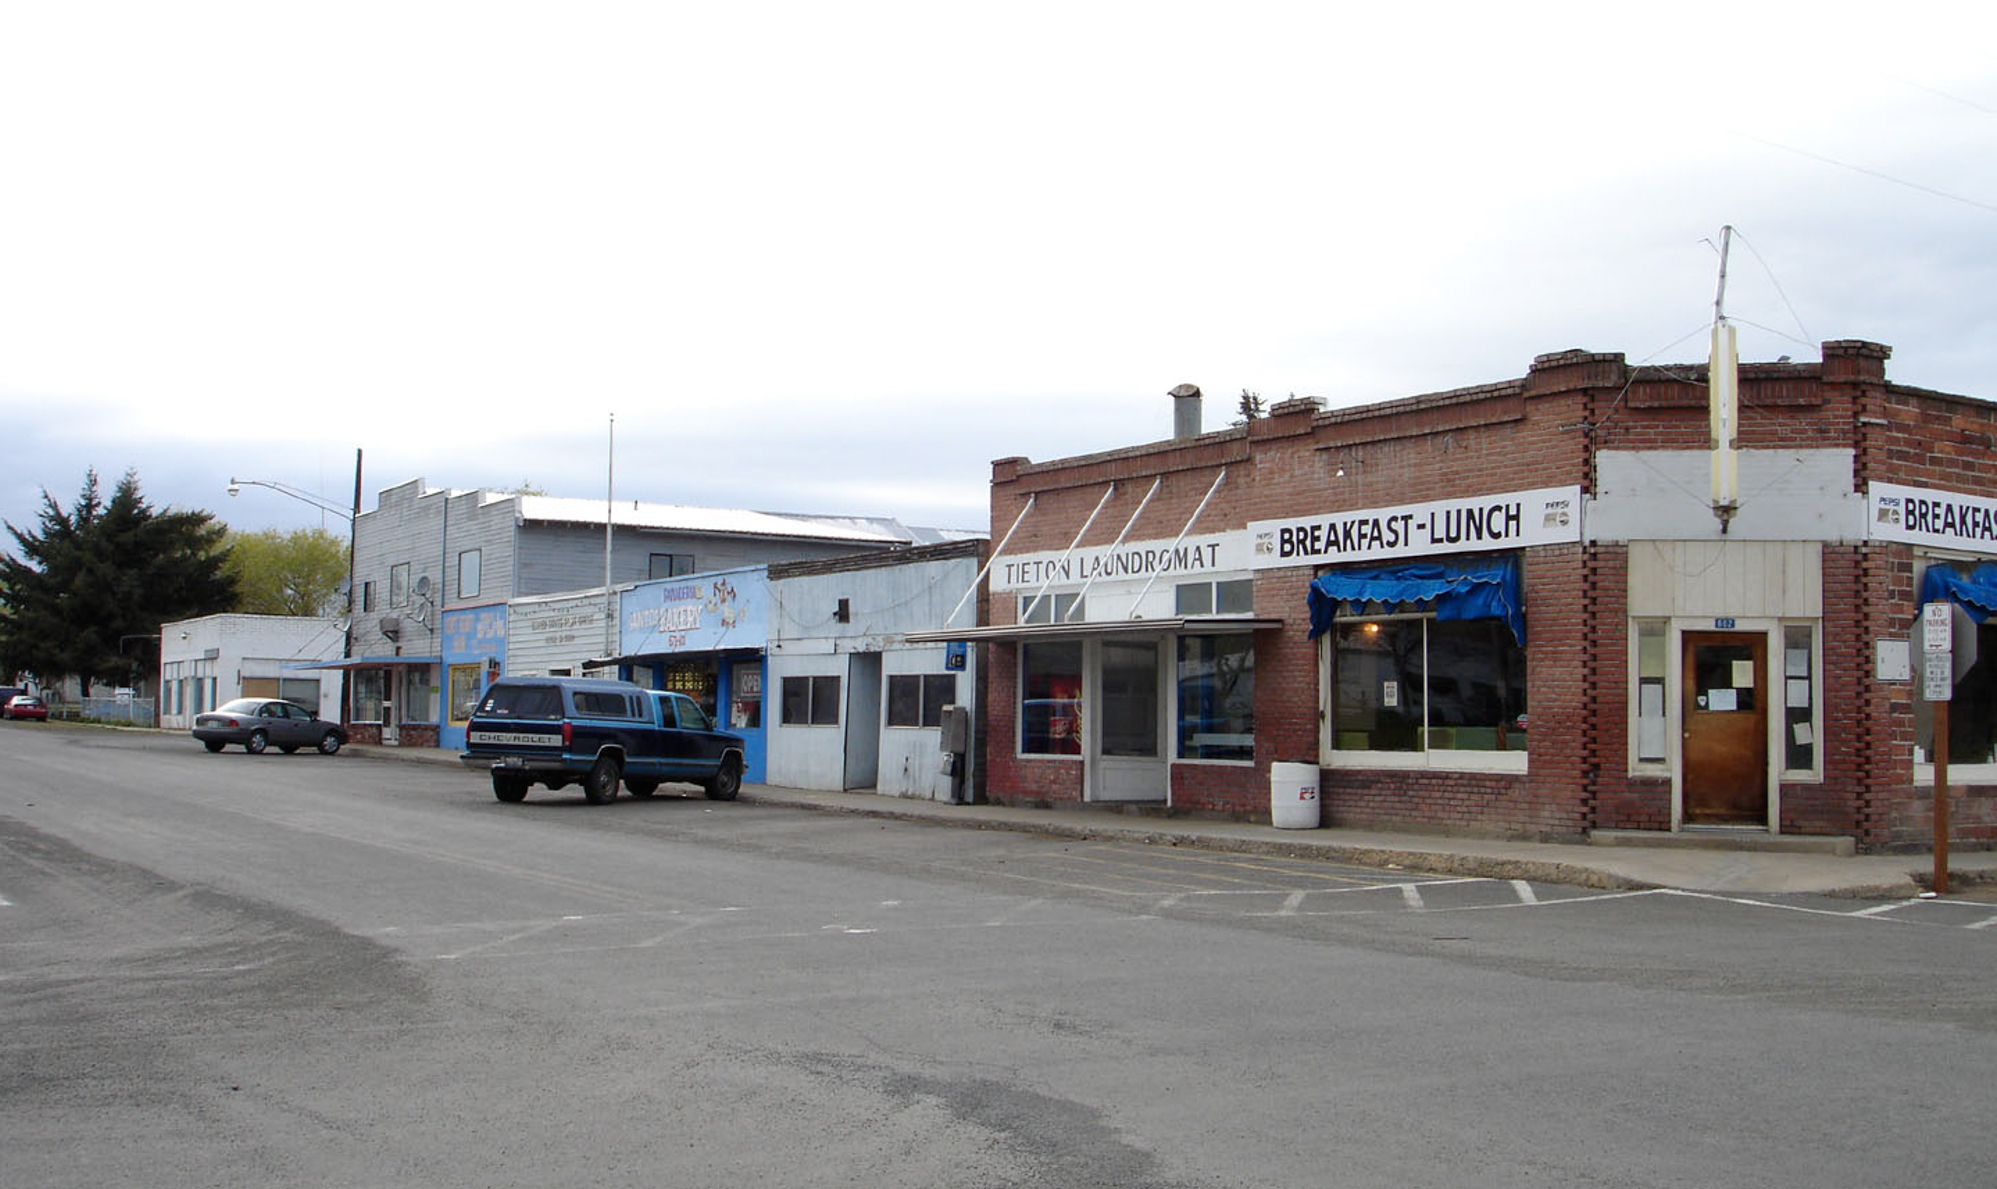 old storefronts along a wide road in Tieton, Washington